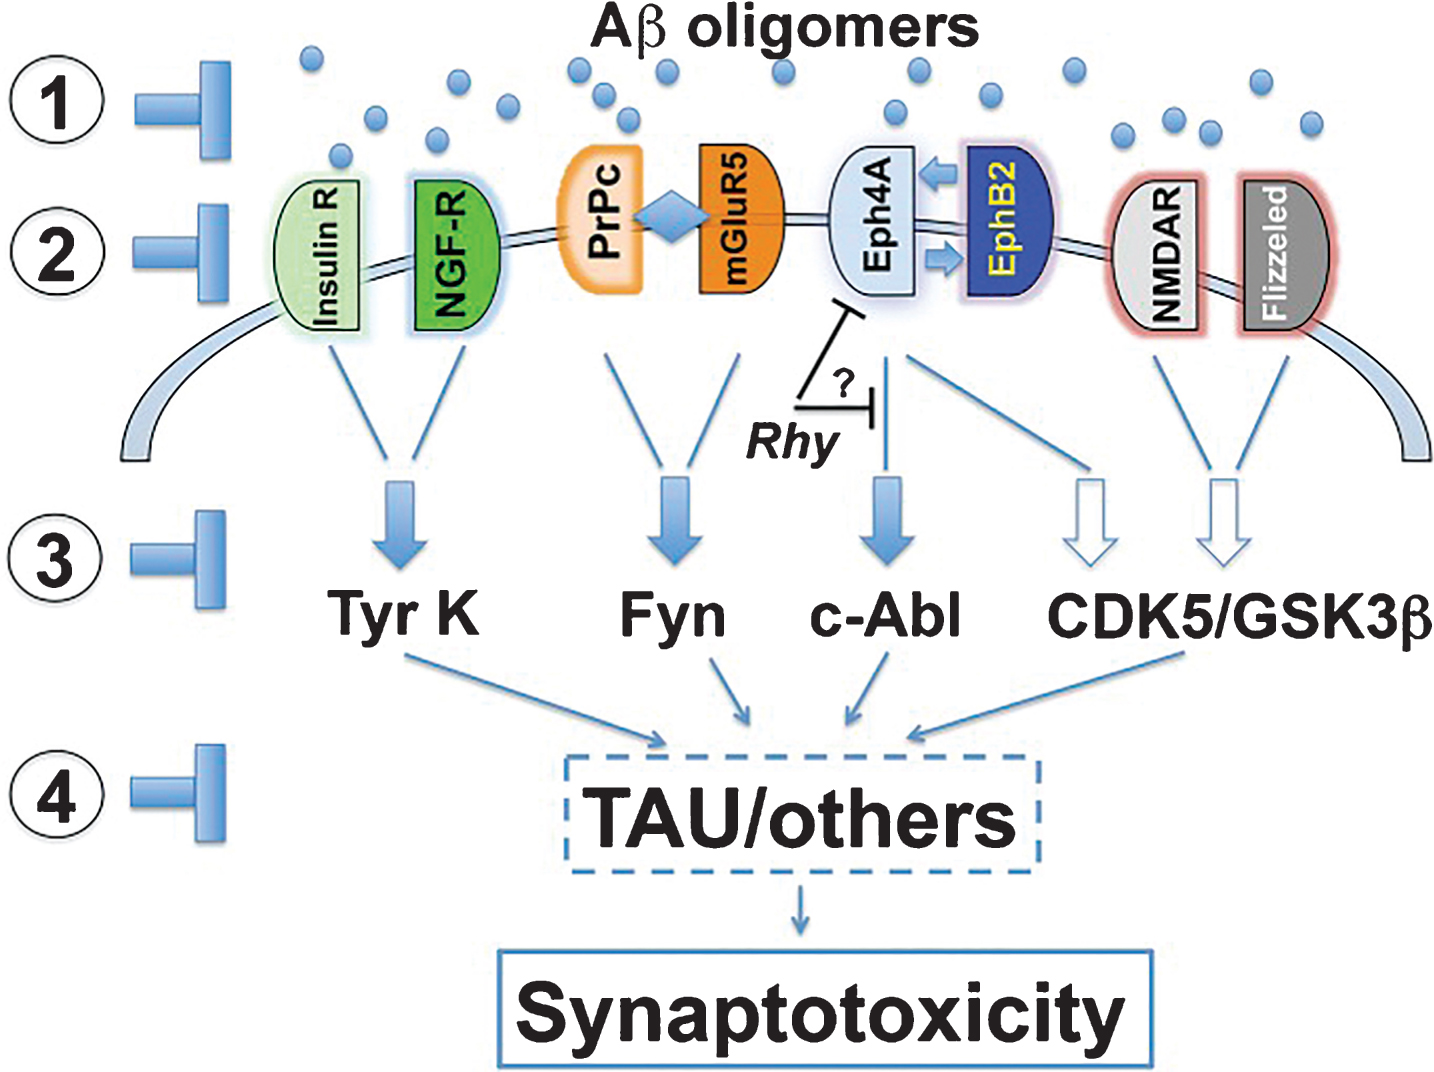 Putative therapeutic targets of the AβO pathogenic cascade. Including: 1) AβOs themselves; 2) AβO receptors; 3) signaling pathways; or 4) downstream effectors such as tau. Reprinted with permission of PNAS from “Toward a unified therapeutics approach targeting putative amyloid-beta oligomer receptors” by Overk CR and Masliah E. This was published in Proc Natl Acad Sci U S A, 2014, 111(38): 13680-13681 [392].